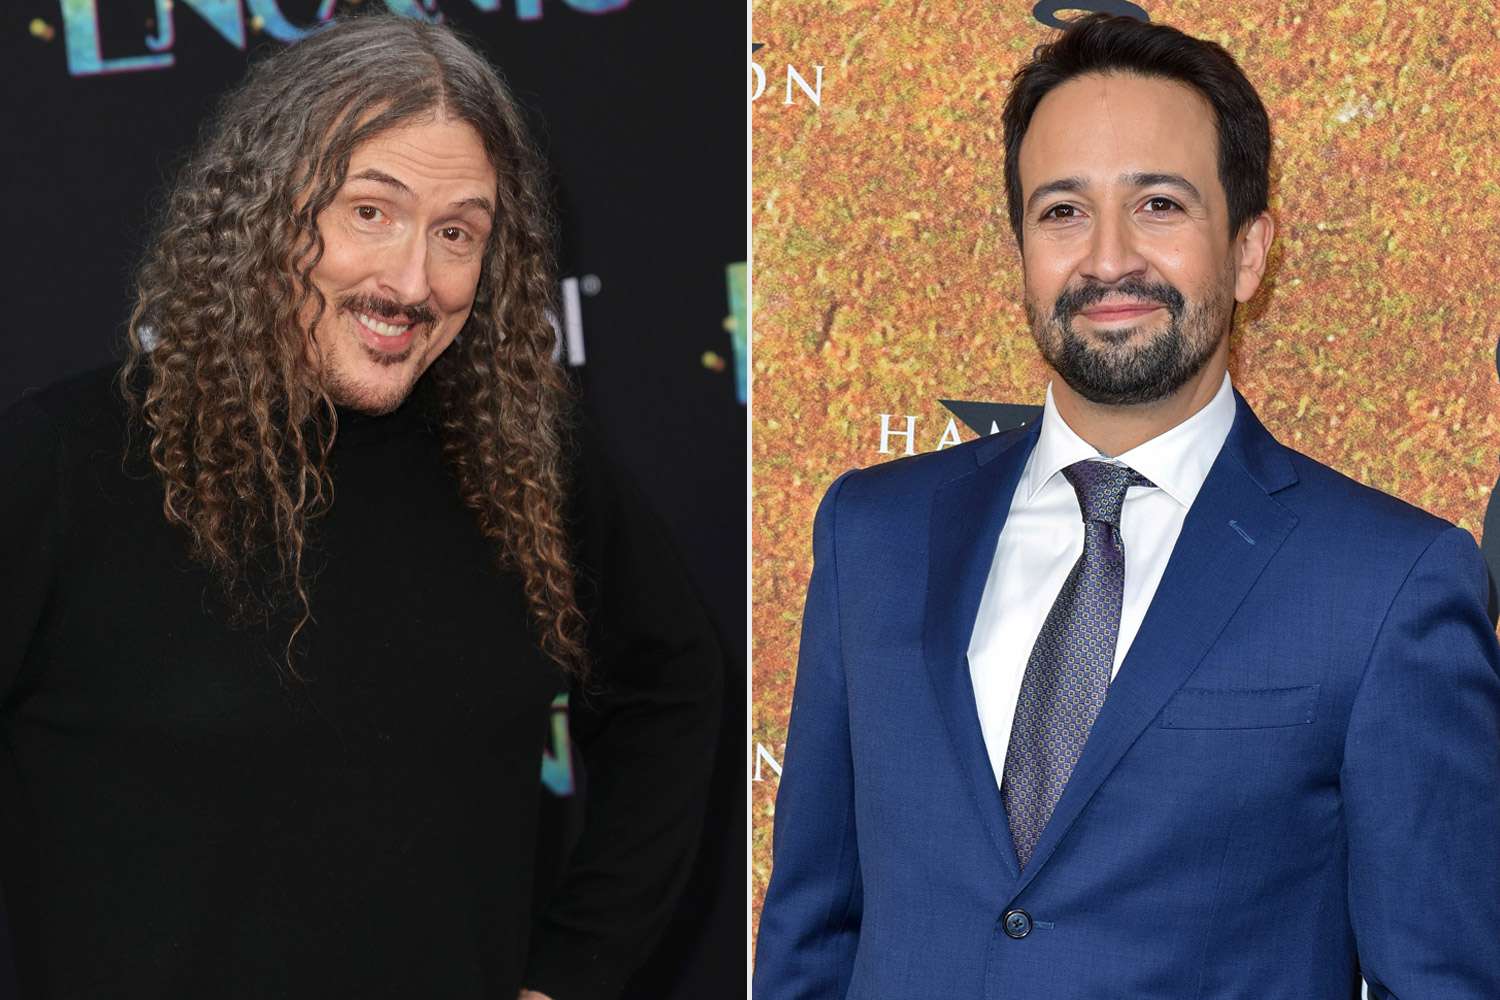 LOS ANGELES, CALIFORNIA - NOVEMBER 03: "Weird Al" Yankovic attends Disney Studios' premiere of "Encanto" at El Capitan Theatre on November 03, 2021 in Los Angeles, California. (Photo by Kevin Winter/Getty Images); HAMBURG, GERMANY - OCTOBER 06: US actor and composer of the musical Lin-Manuel Miranda attends the premiere of "Hamilton - Das Musical" at Stage Operettenhaus on October 6, 2022 in Hamburg, Germany. (Photo by Tristar Media/Getty Images)